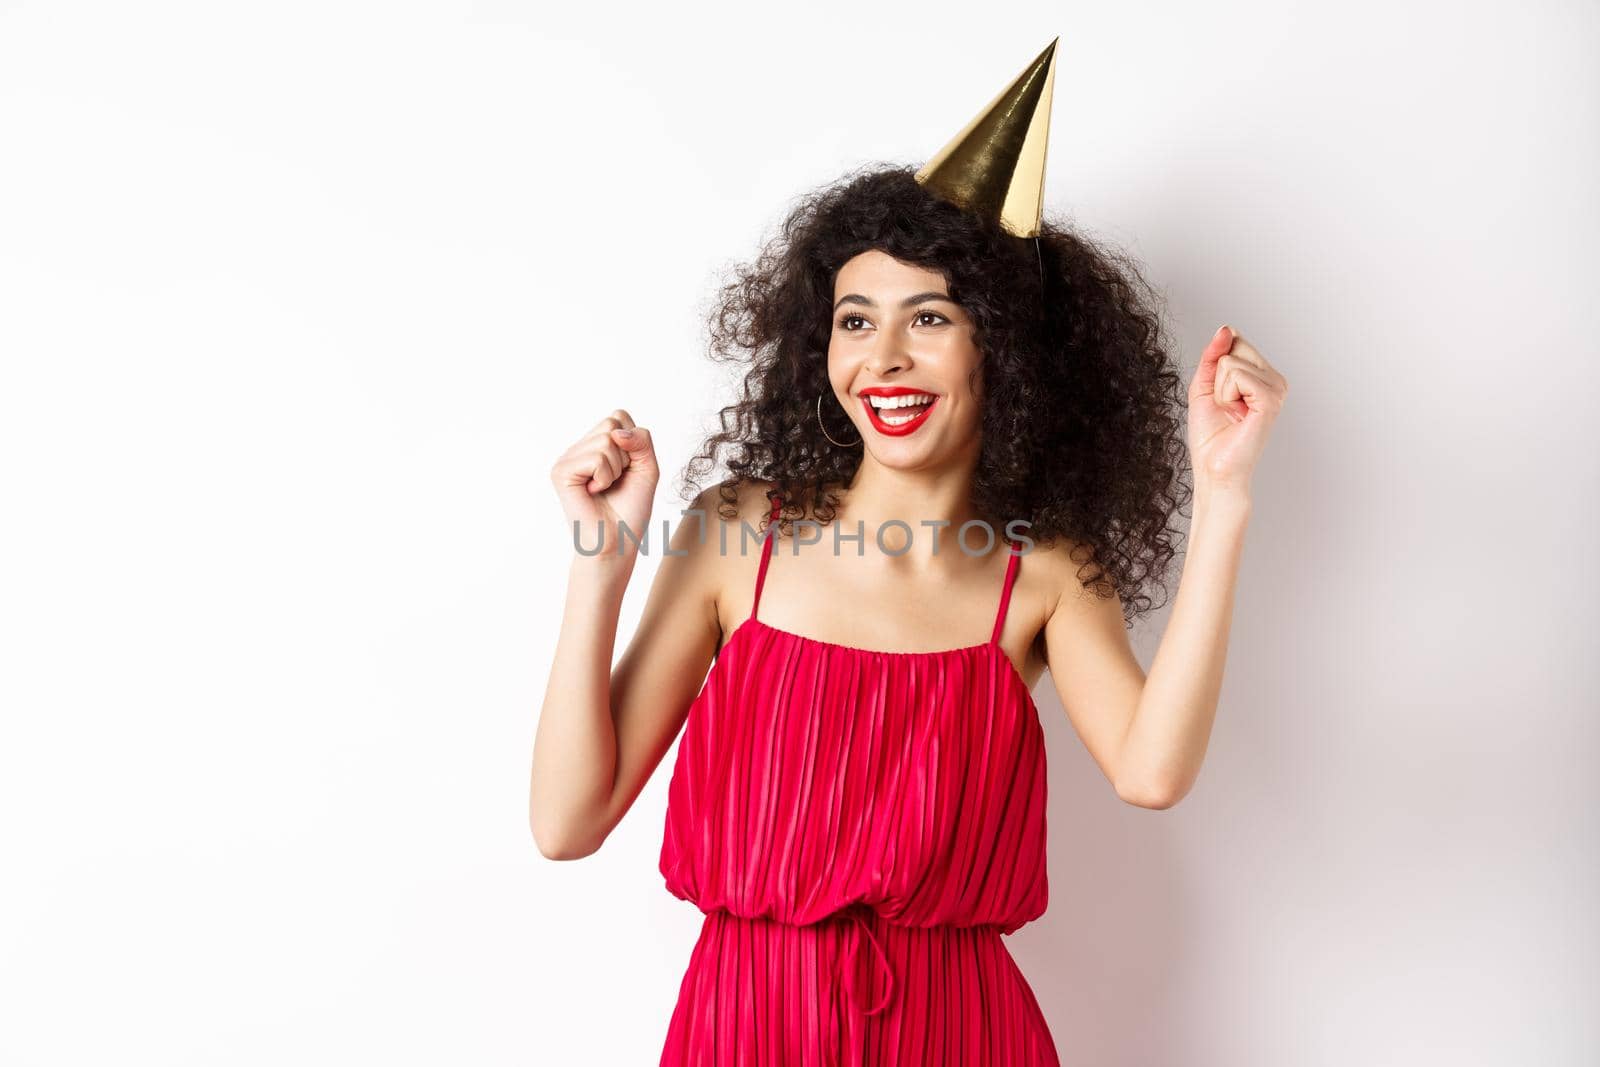 Happy birthday girl celebrating, wearing party hat and red dress, dancing and having fun, standing against white background.